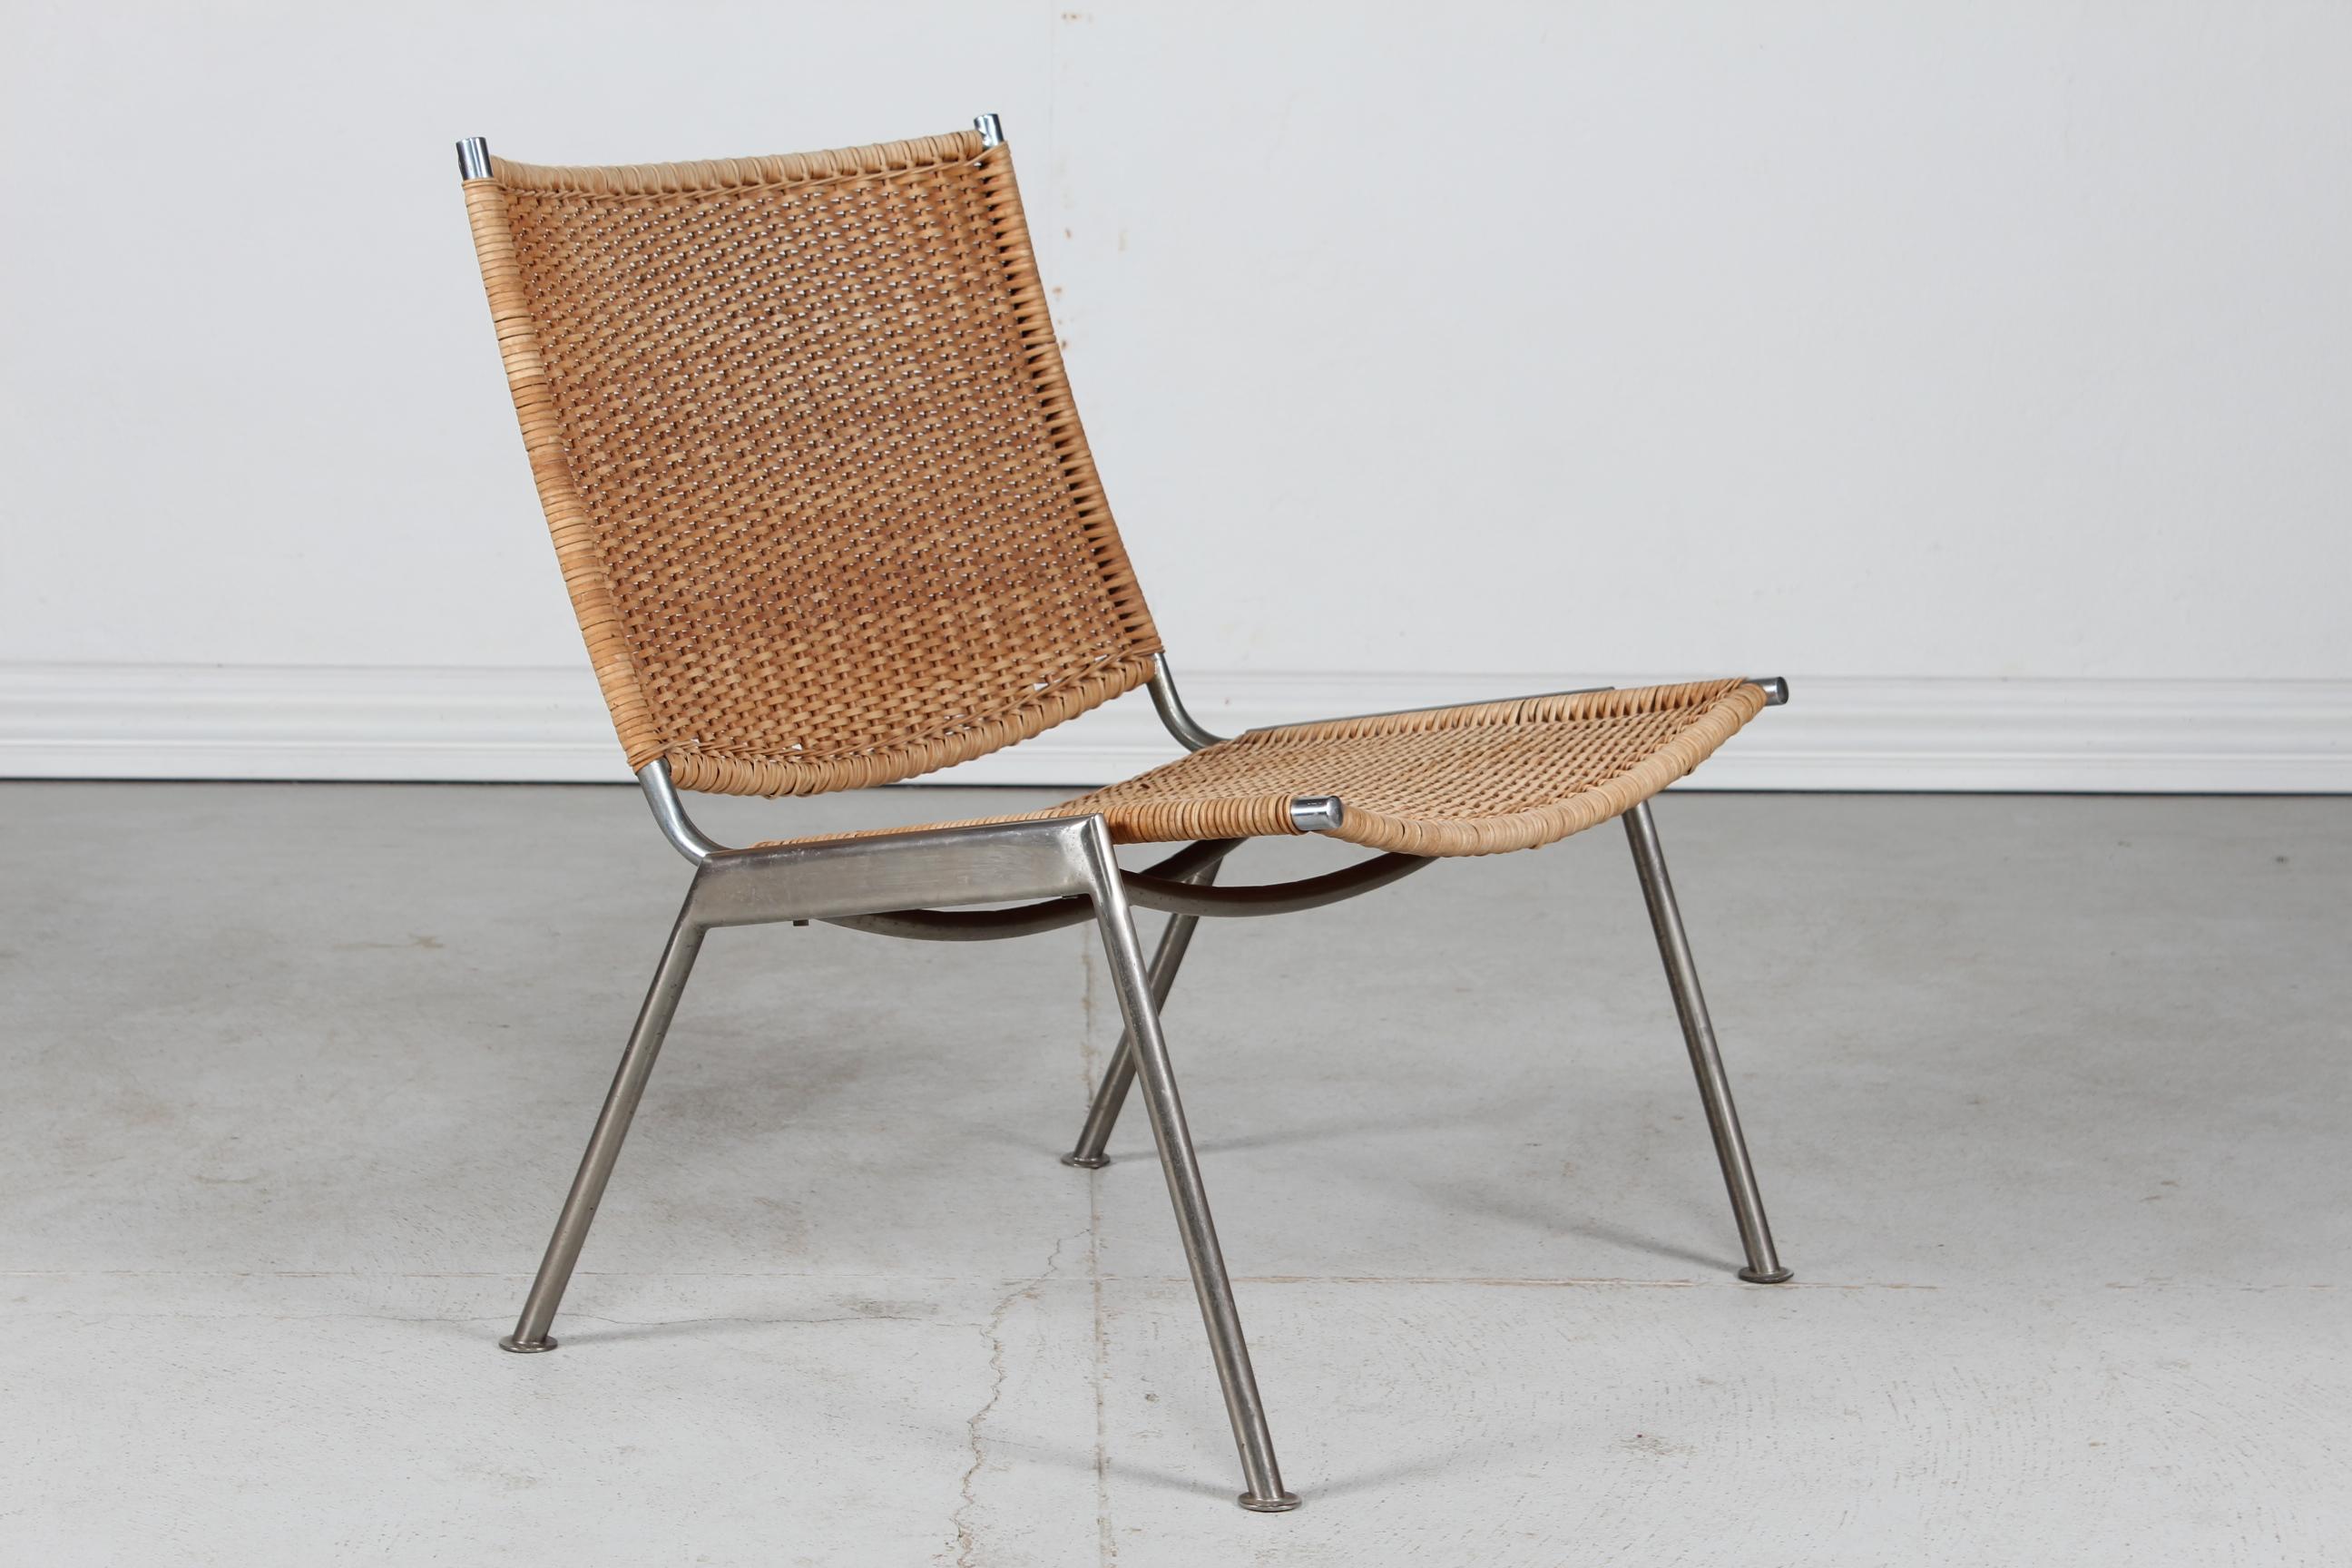 Danish Lounge chair in Poul Kjærholm style made in the 1960´s by a Danish furniture manufacturer.
The chair has a metal frame covered with seat and back rest of plaited cane

Nice vintage condition, cane also in very good condition

With its